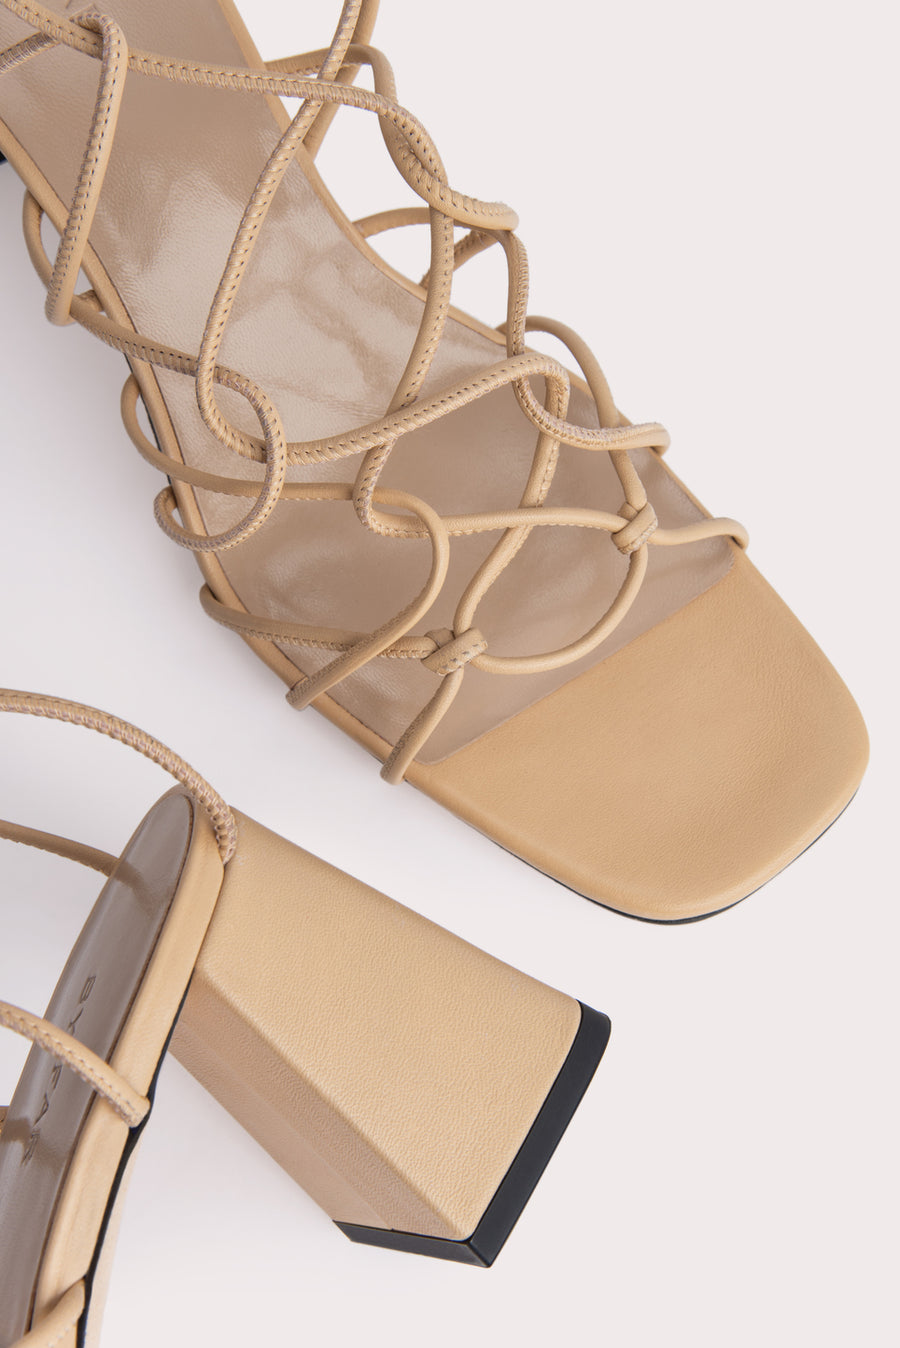 The 'Alexander' sandal. Made from soft Nappa leather woven and knotted. Rounded toe. 